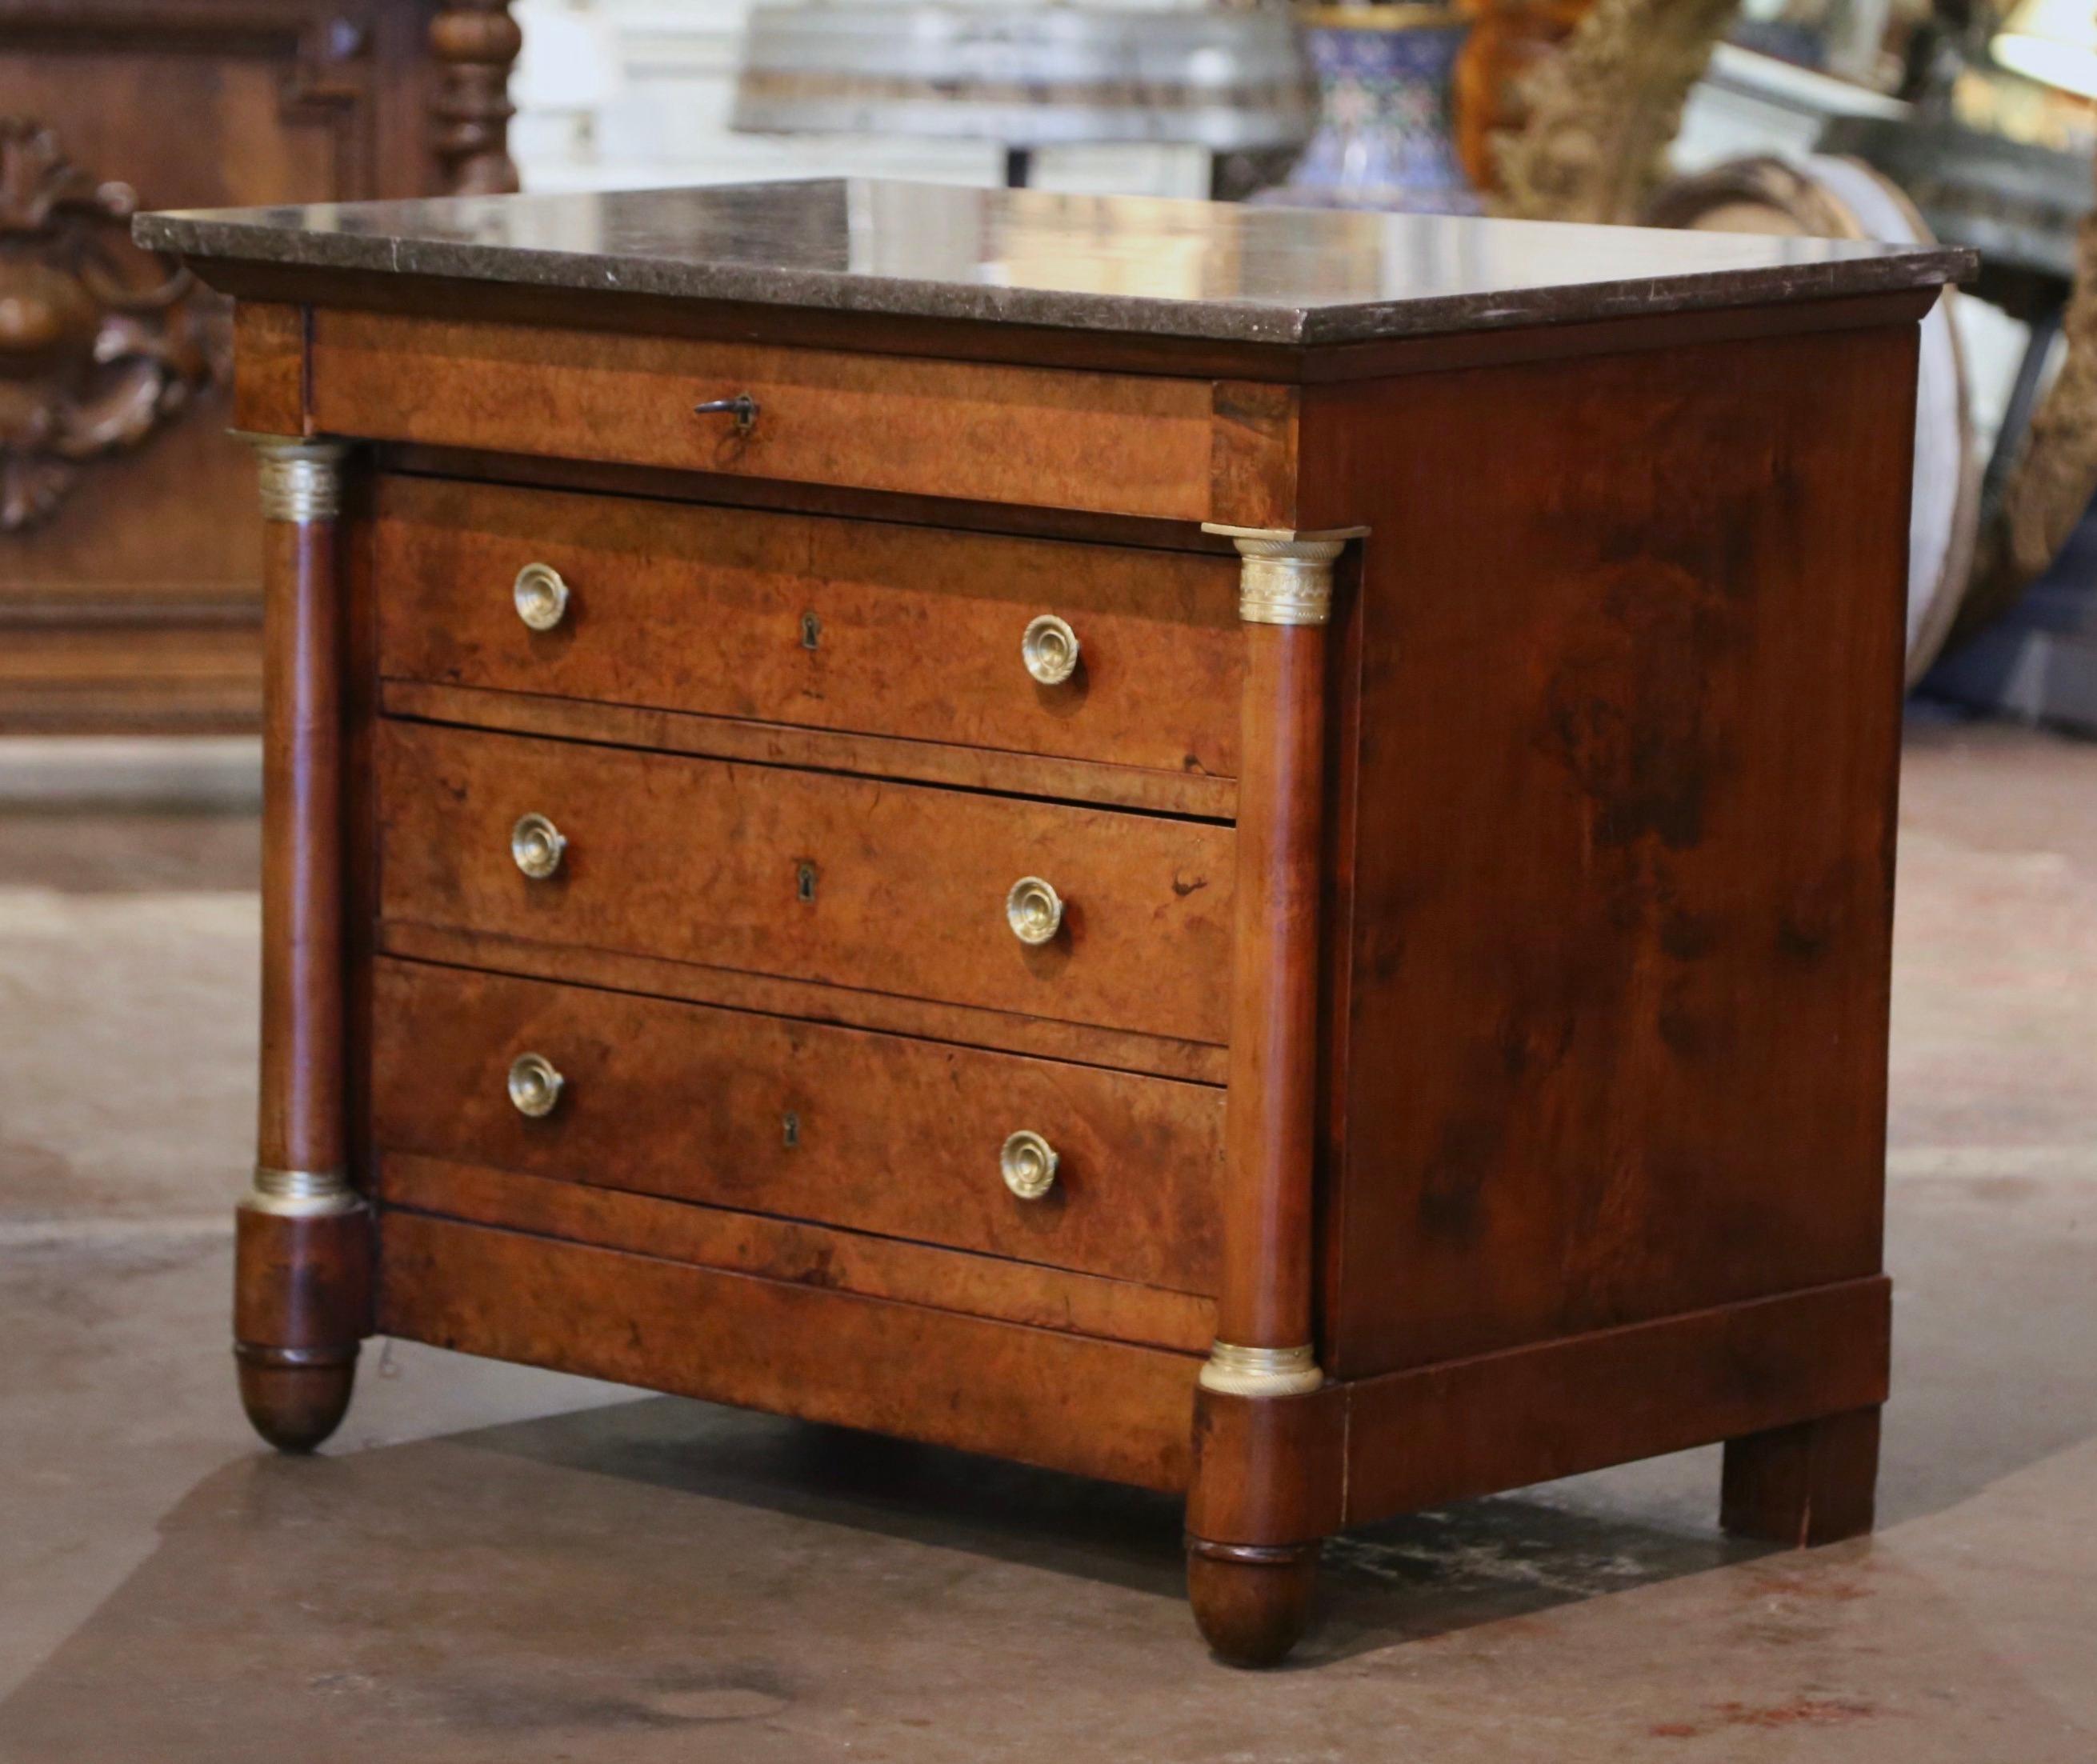 19th Century French Empire Marble Top Carved Veneer Elm Commode Chest of Drawers For Sale 6